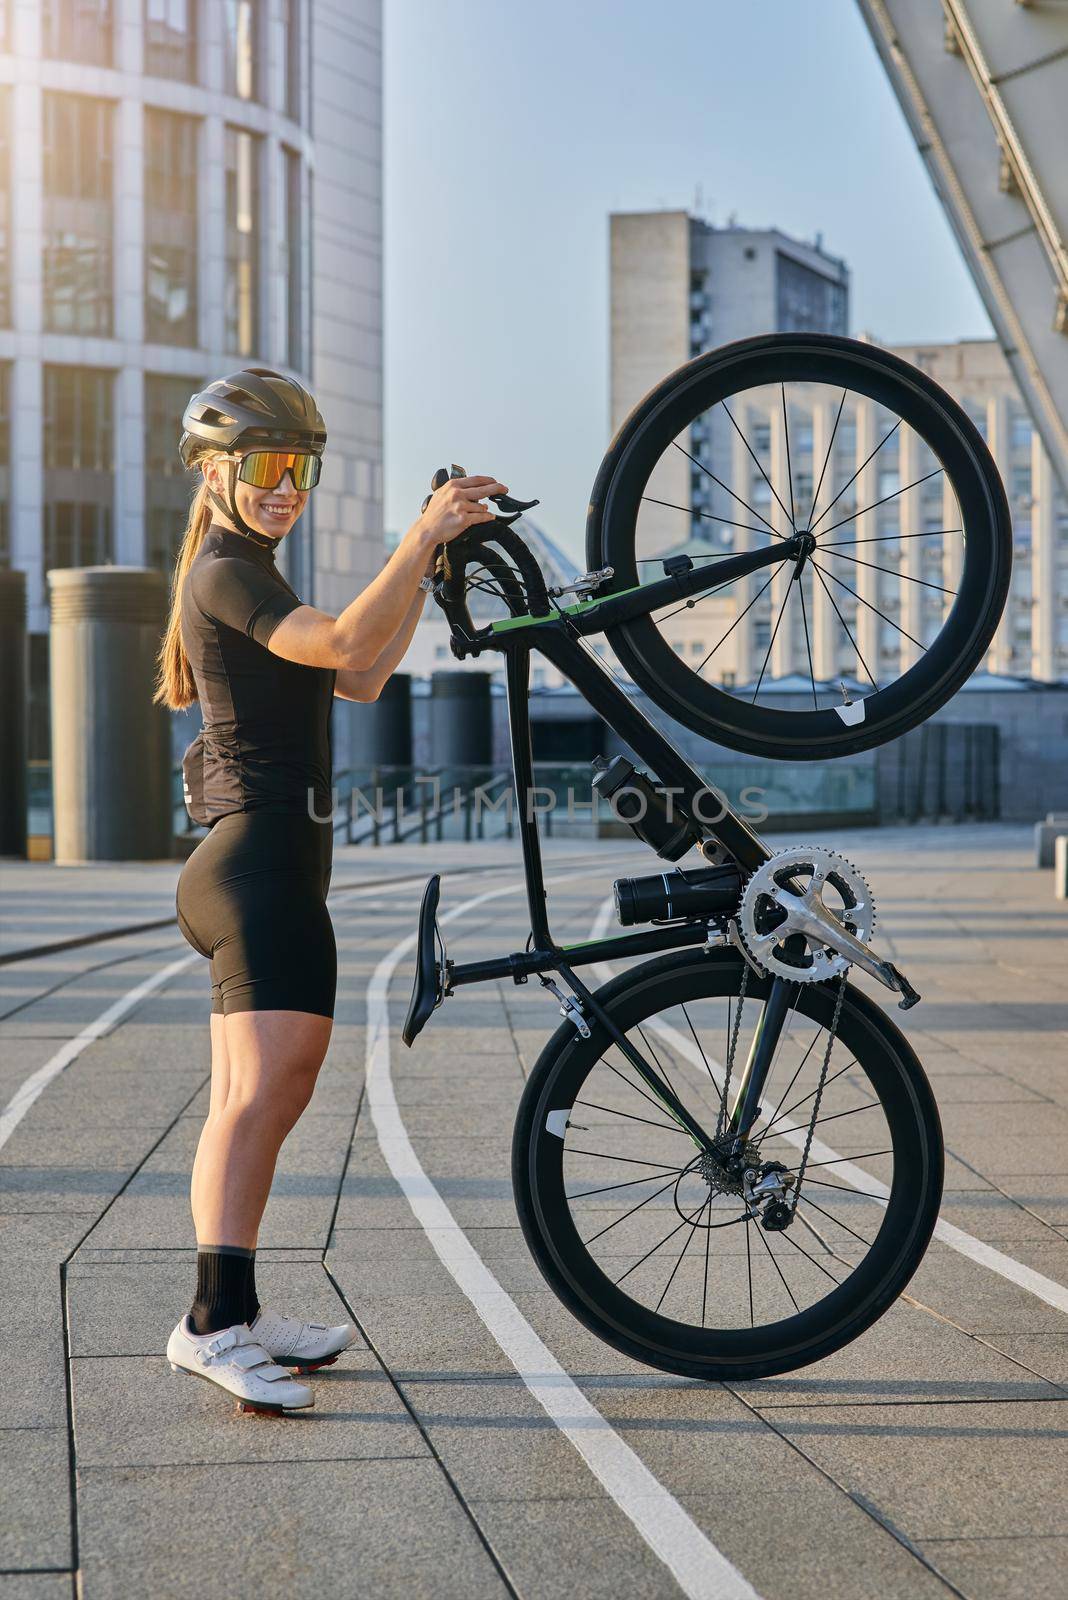 Side view of professional female cyclist in black cycling garment and protective gear smiling at camera, posing with her bicycle standing upright outdoors on a sunny day. Sports concept